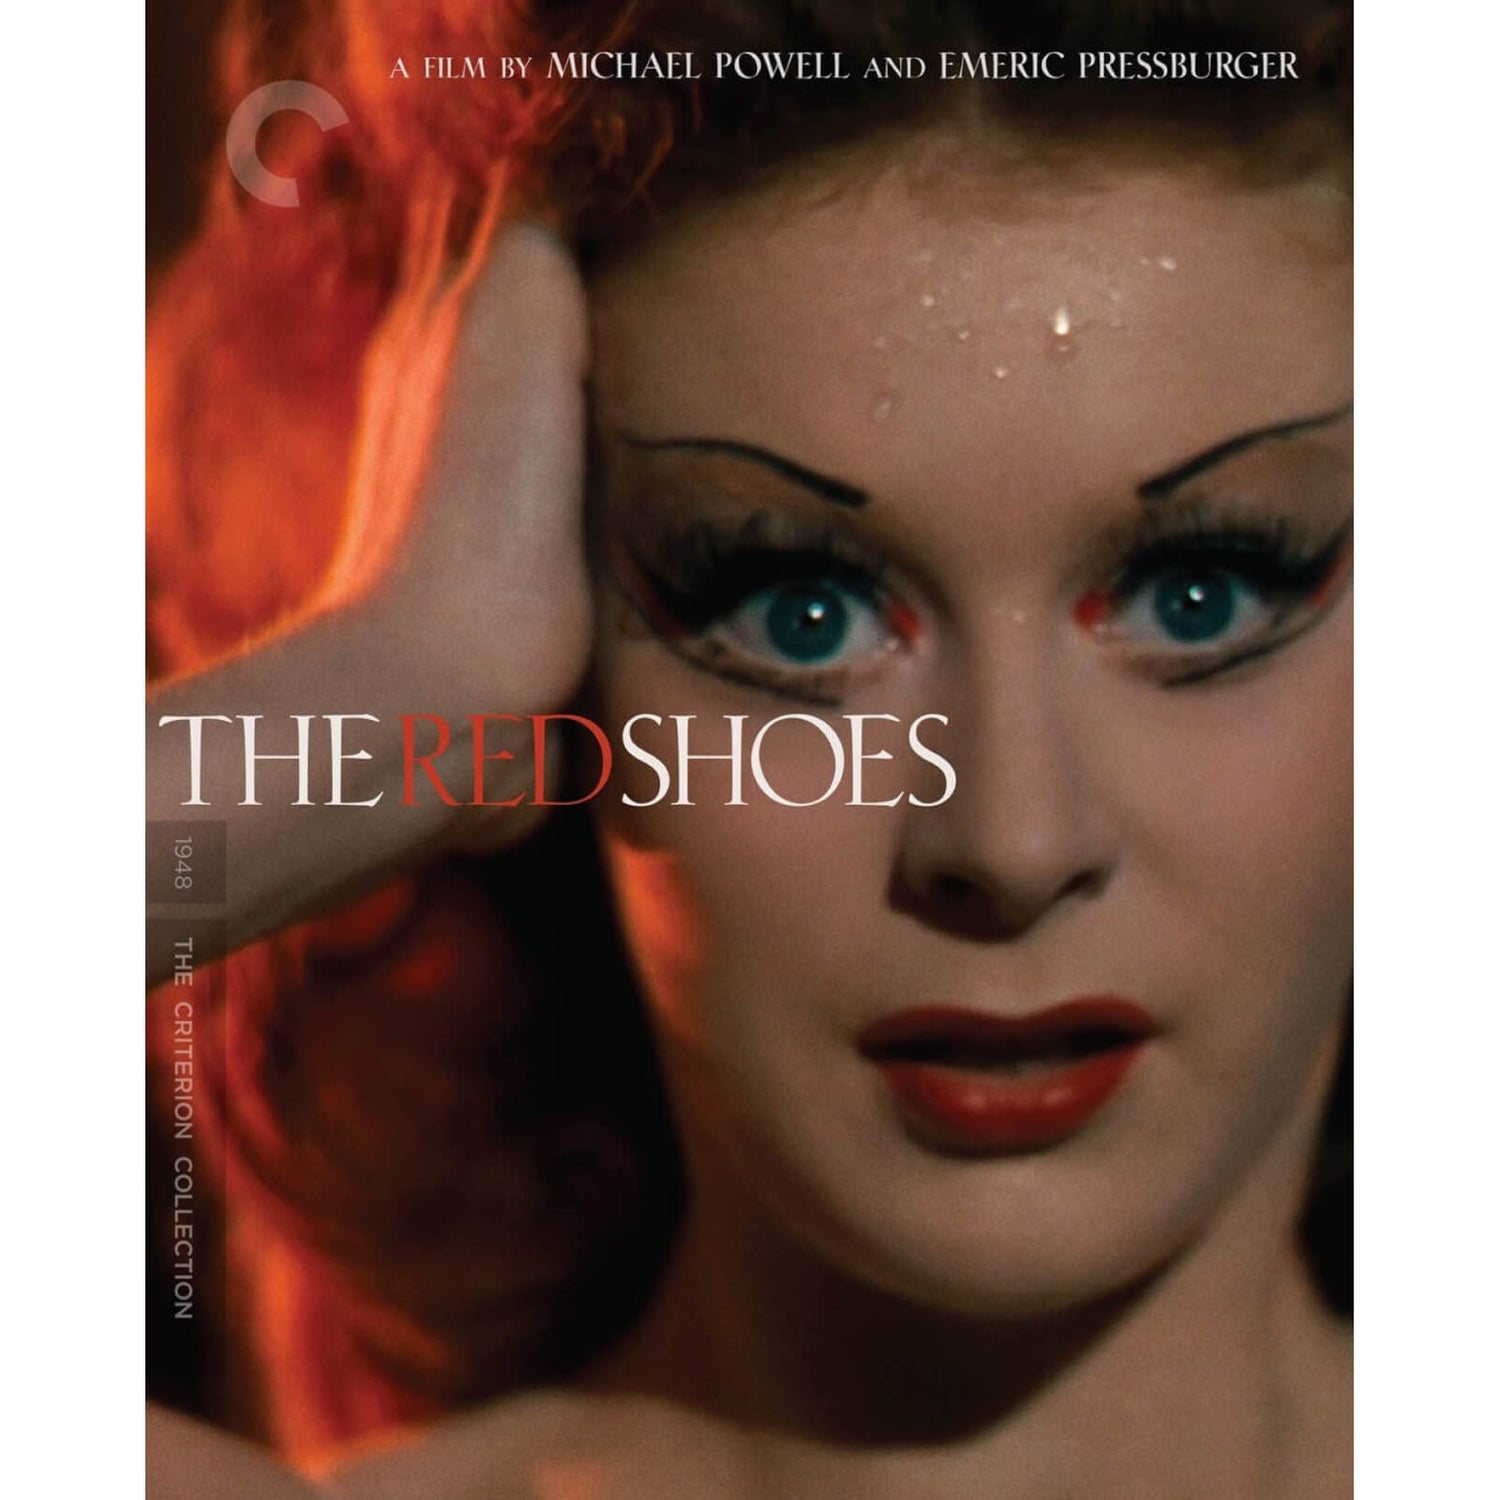 The Red Shoes - The Criterion Collection